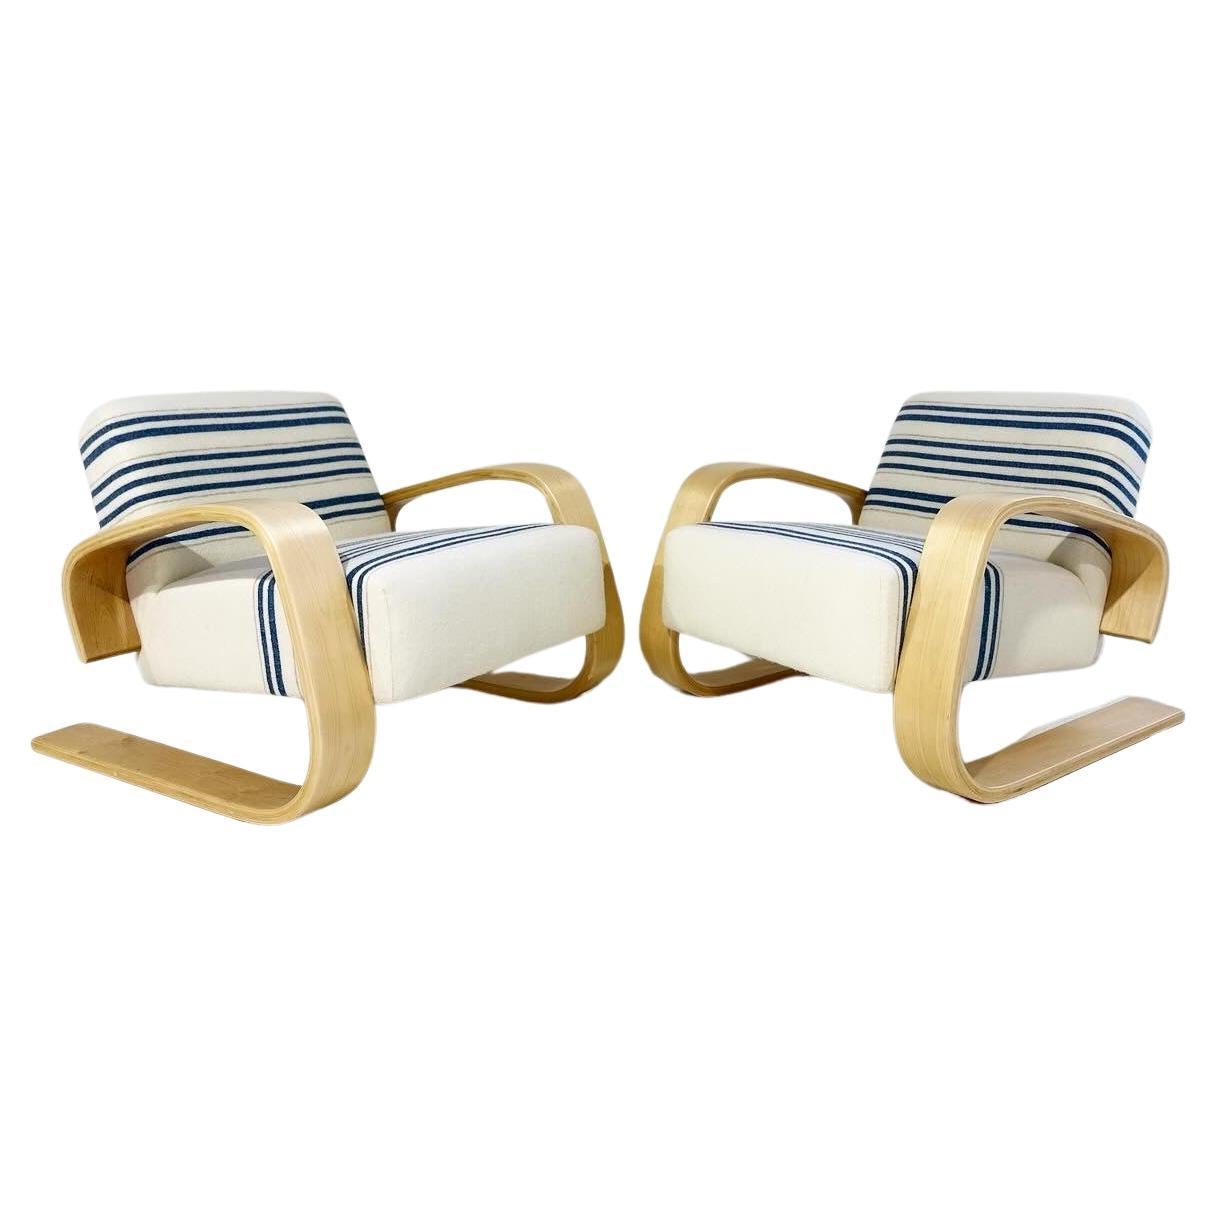 Alvar Aalto Model 400 "Tank" Chairs in Swans Island Company Blankets, Pair For Sale